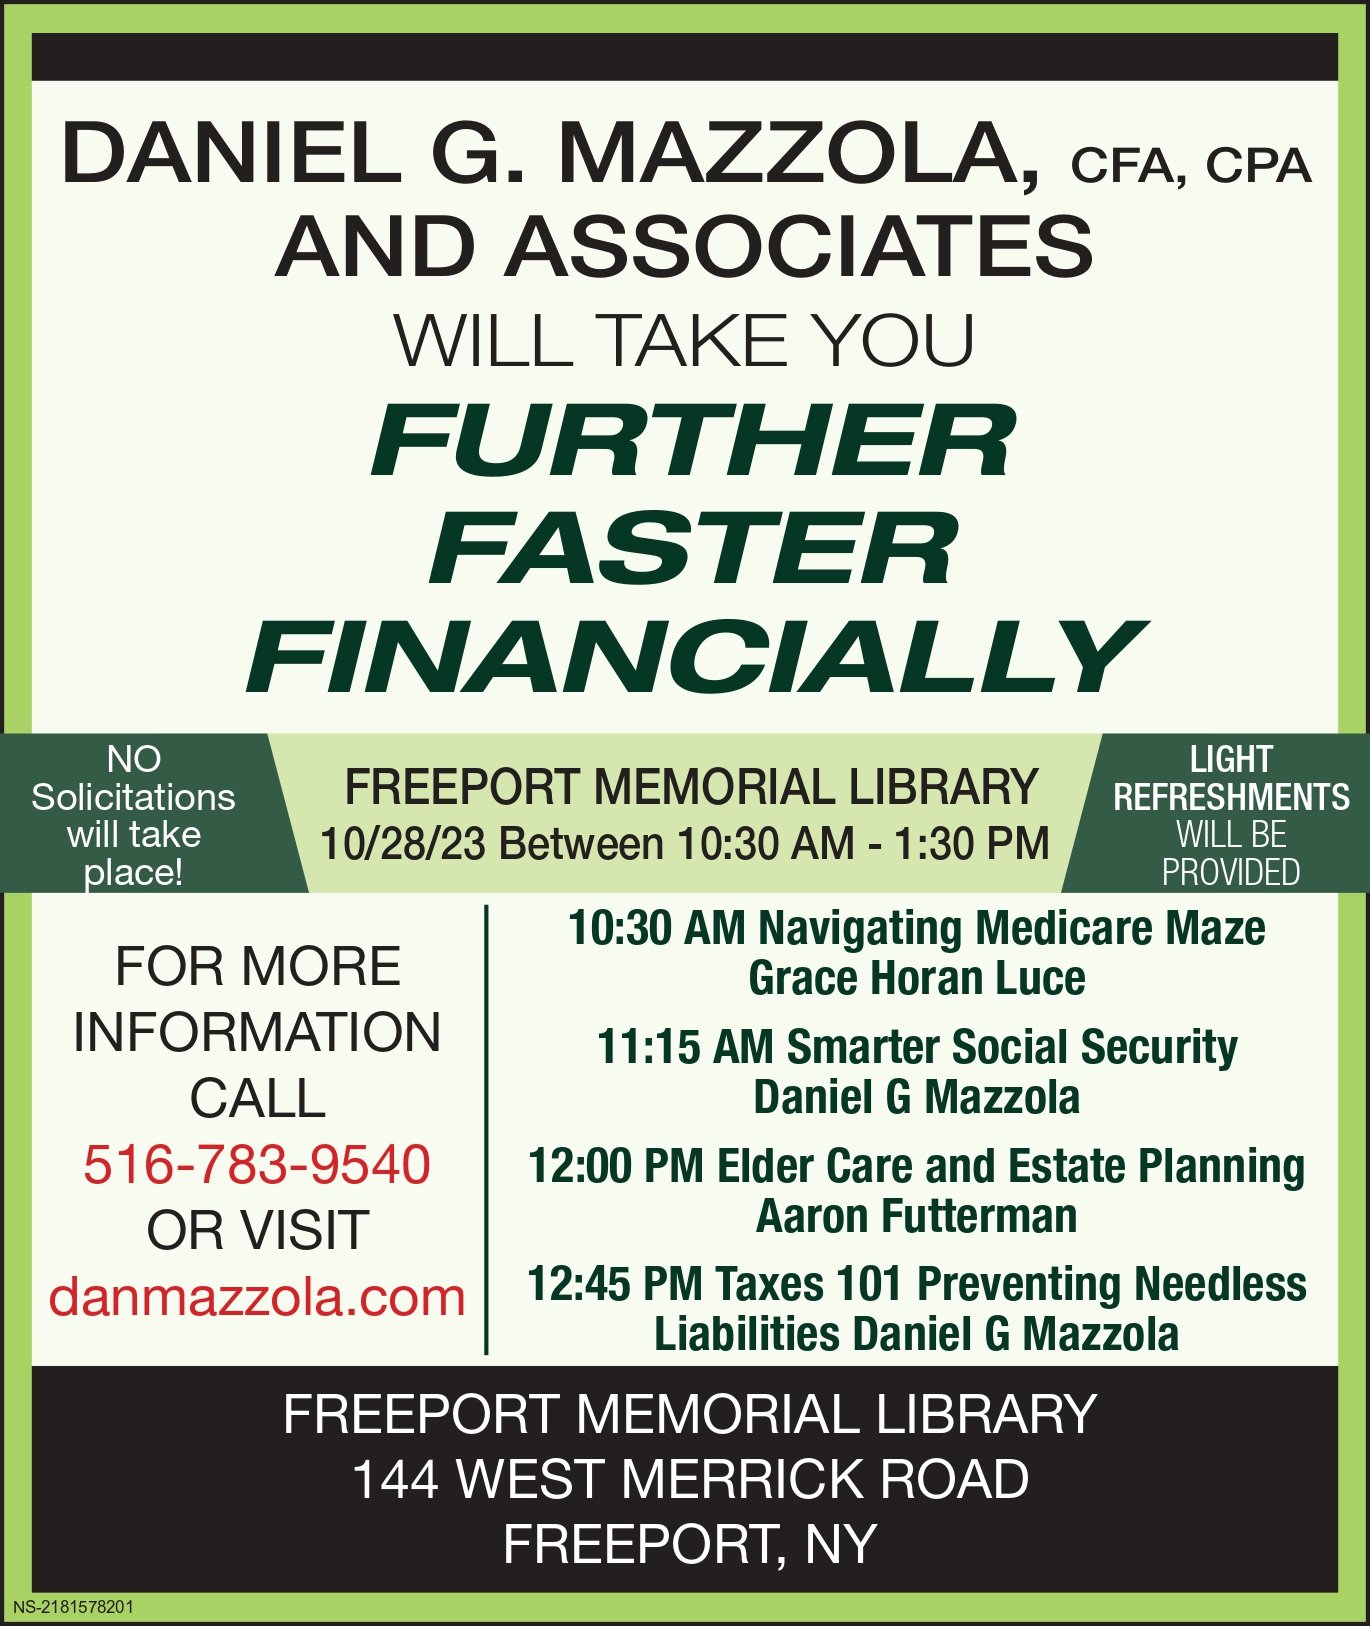 Daniel G. Mazzola, CFA, CPA and Associates will take you further faster financially